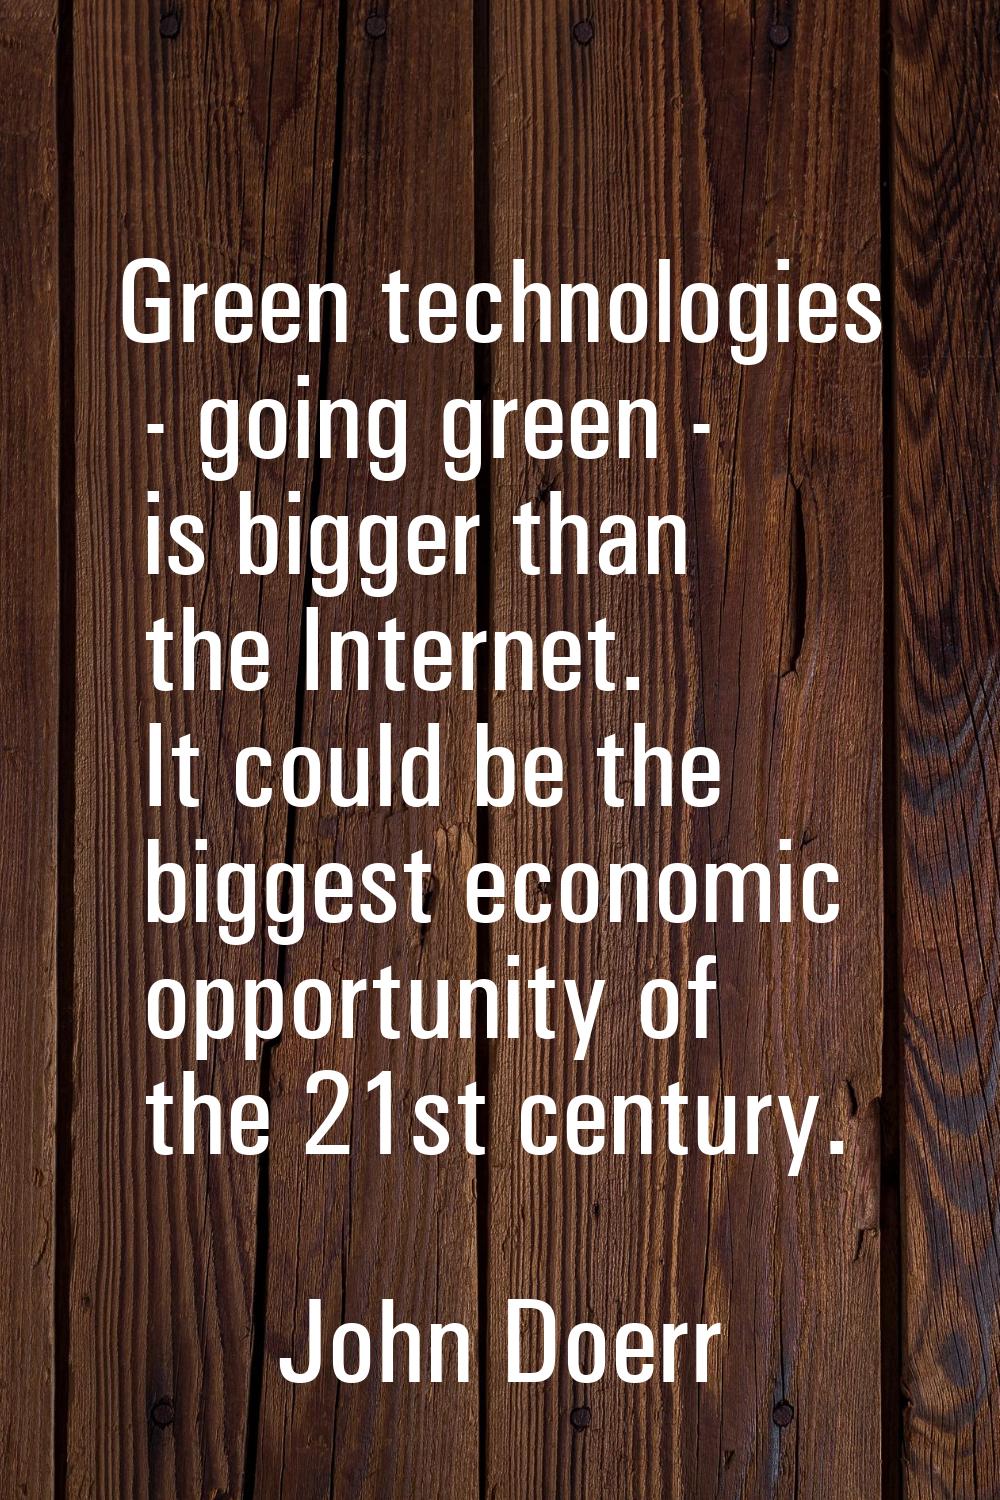 Green technologies - going green - is bigger than the Internet. It could be the biggest economic op